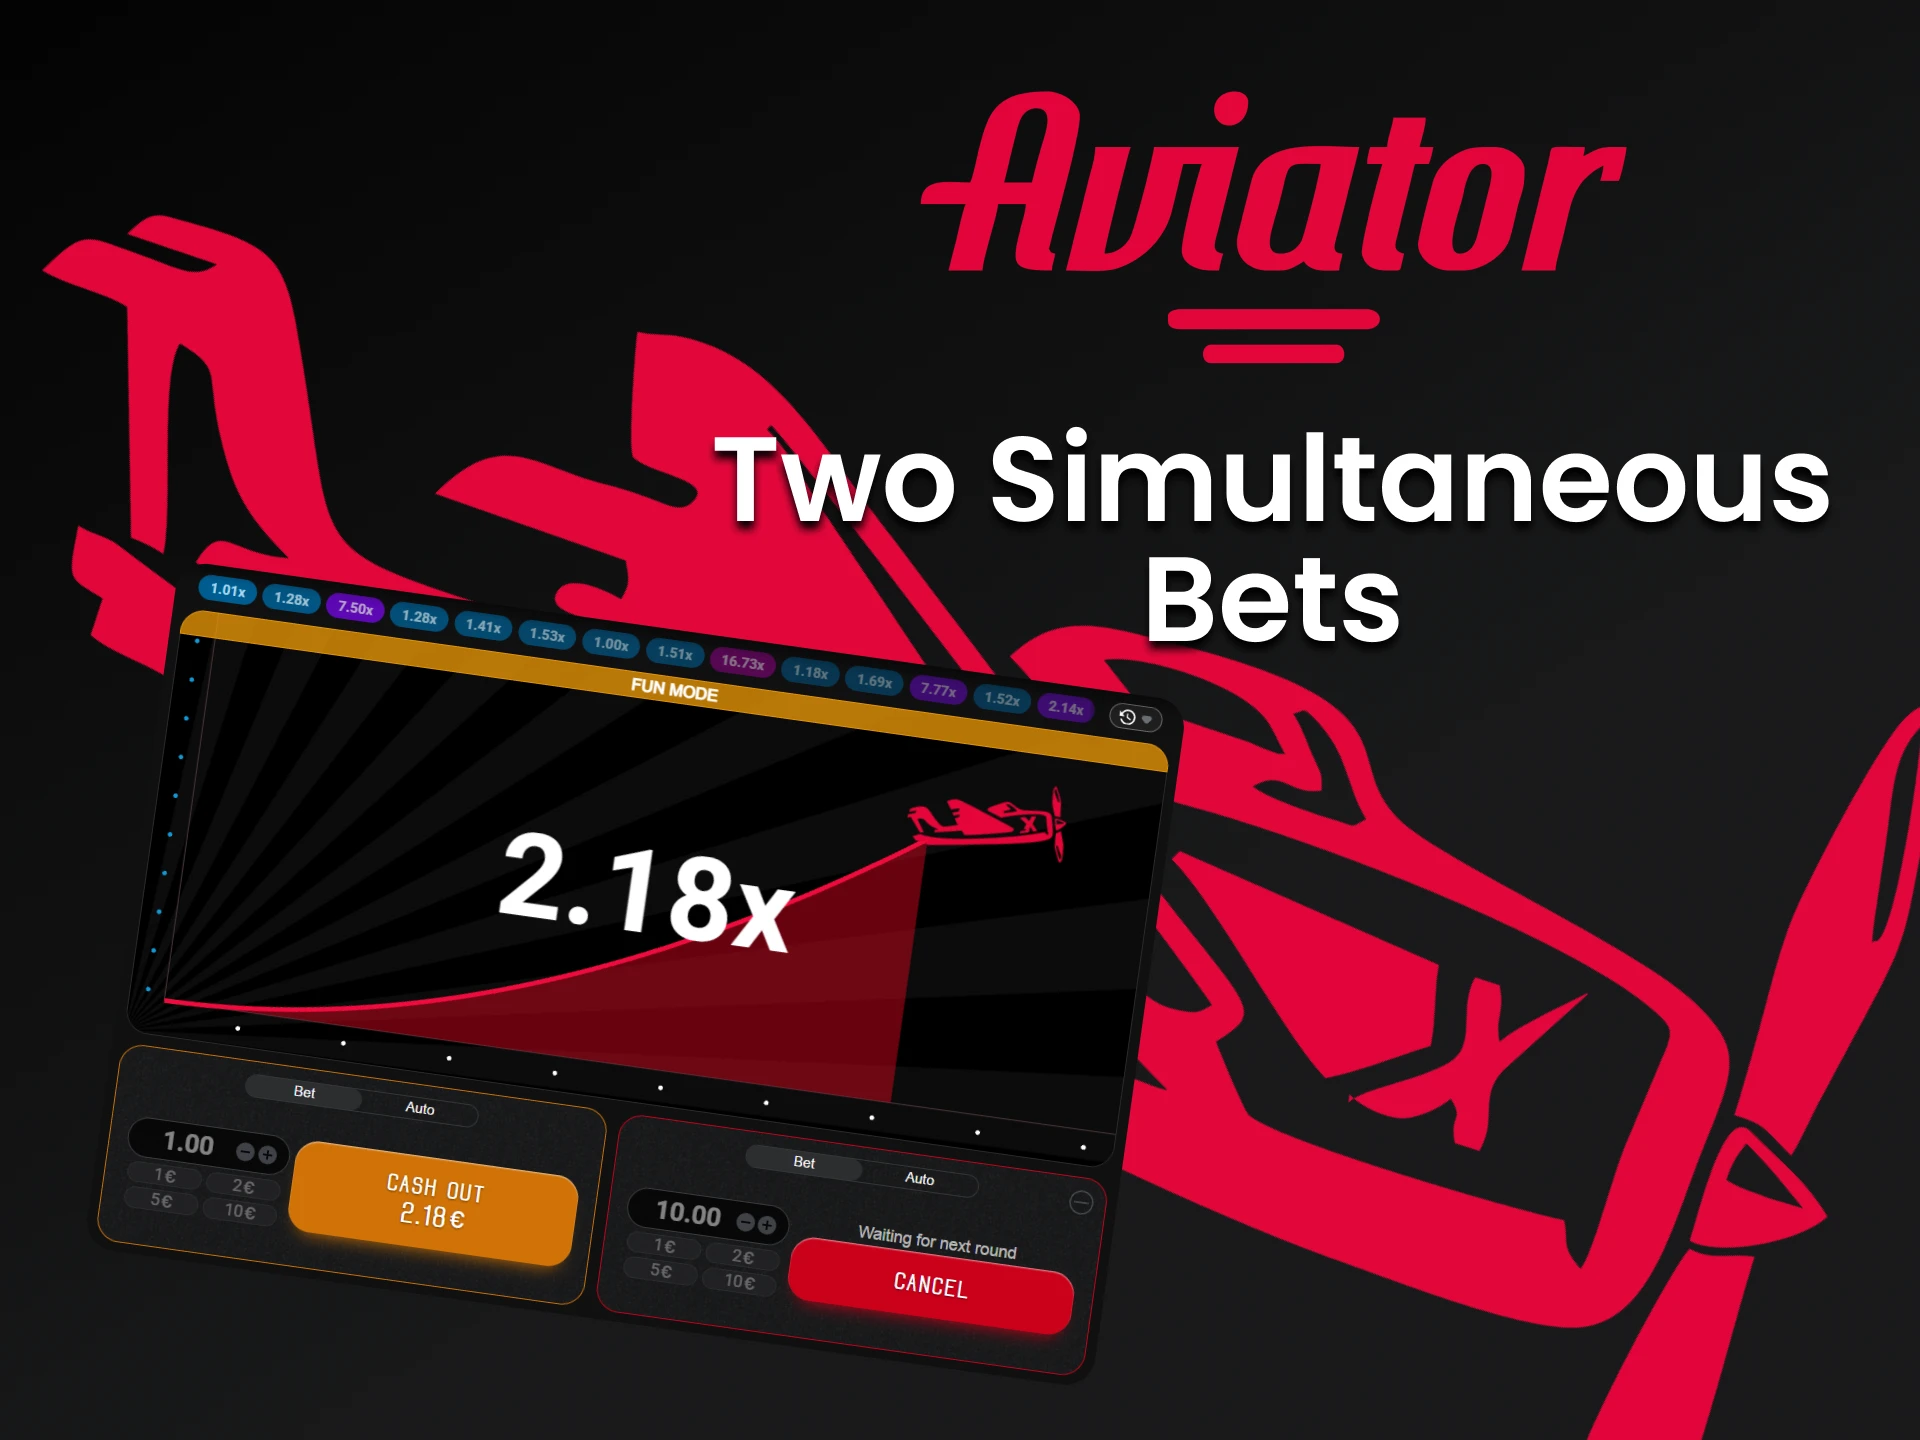 Make two bets in the Aviator game to increase your chance of winning.